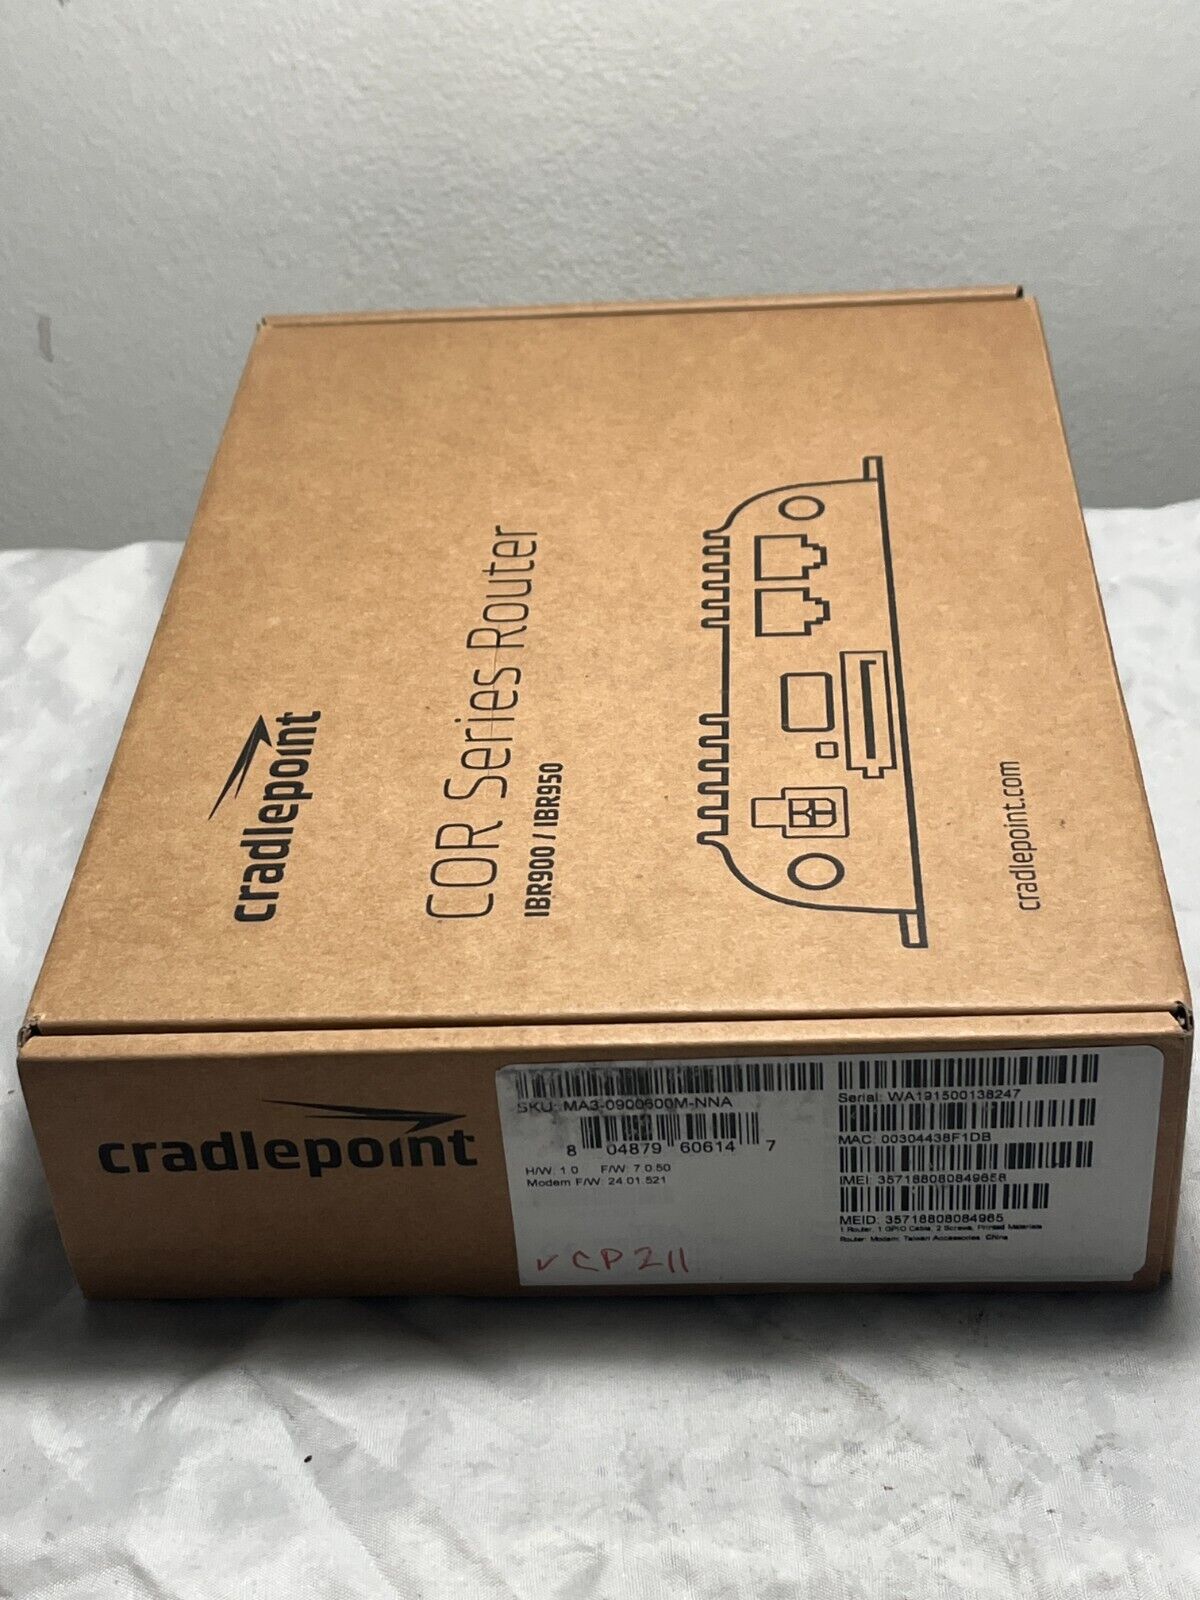 NEW Cradlepoint COR Series Router IBR900/ IBR950 MA3-0900600M-NNA